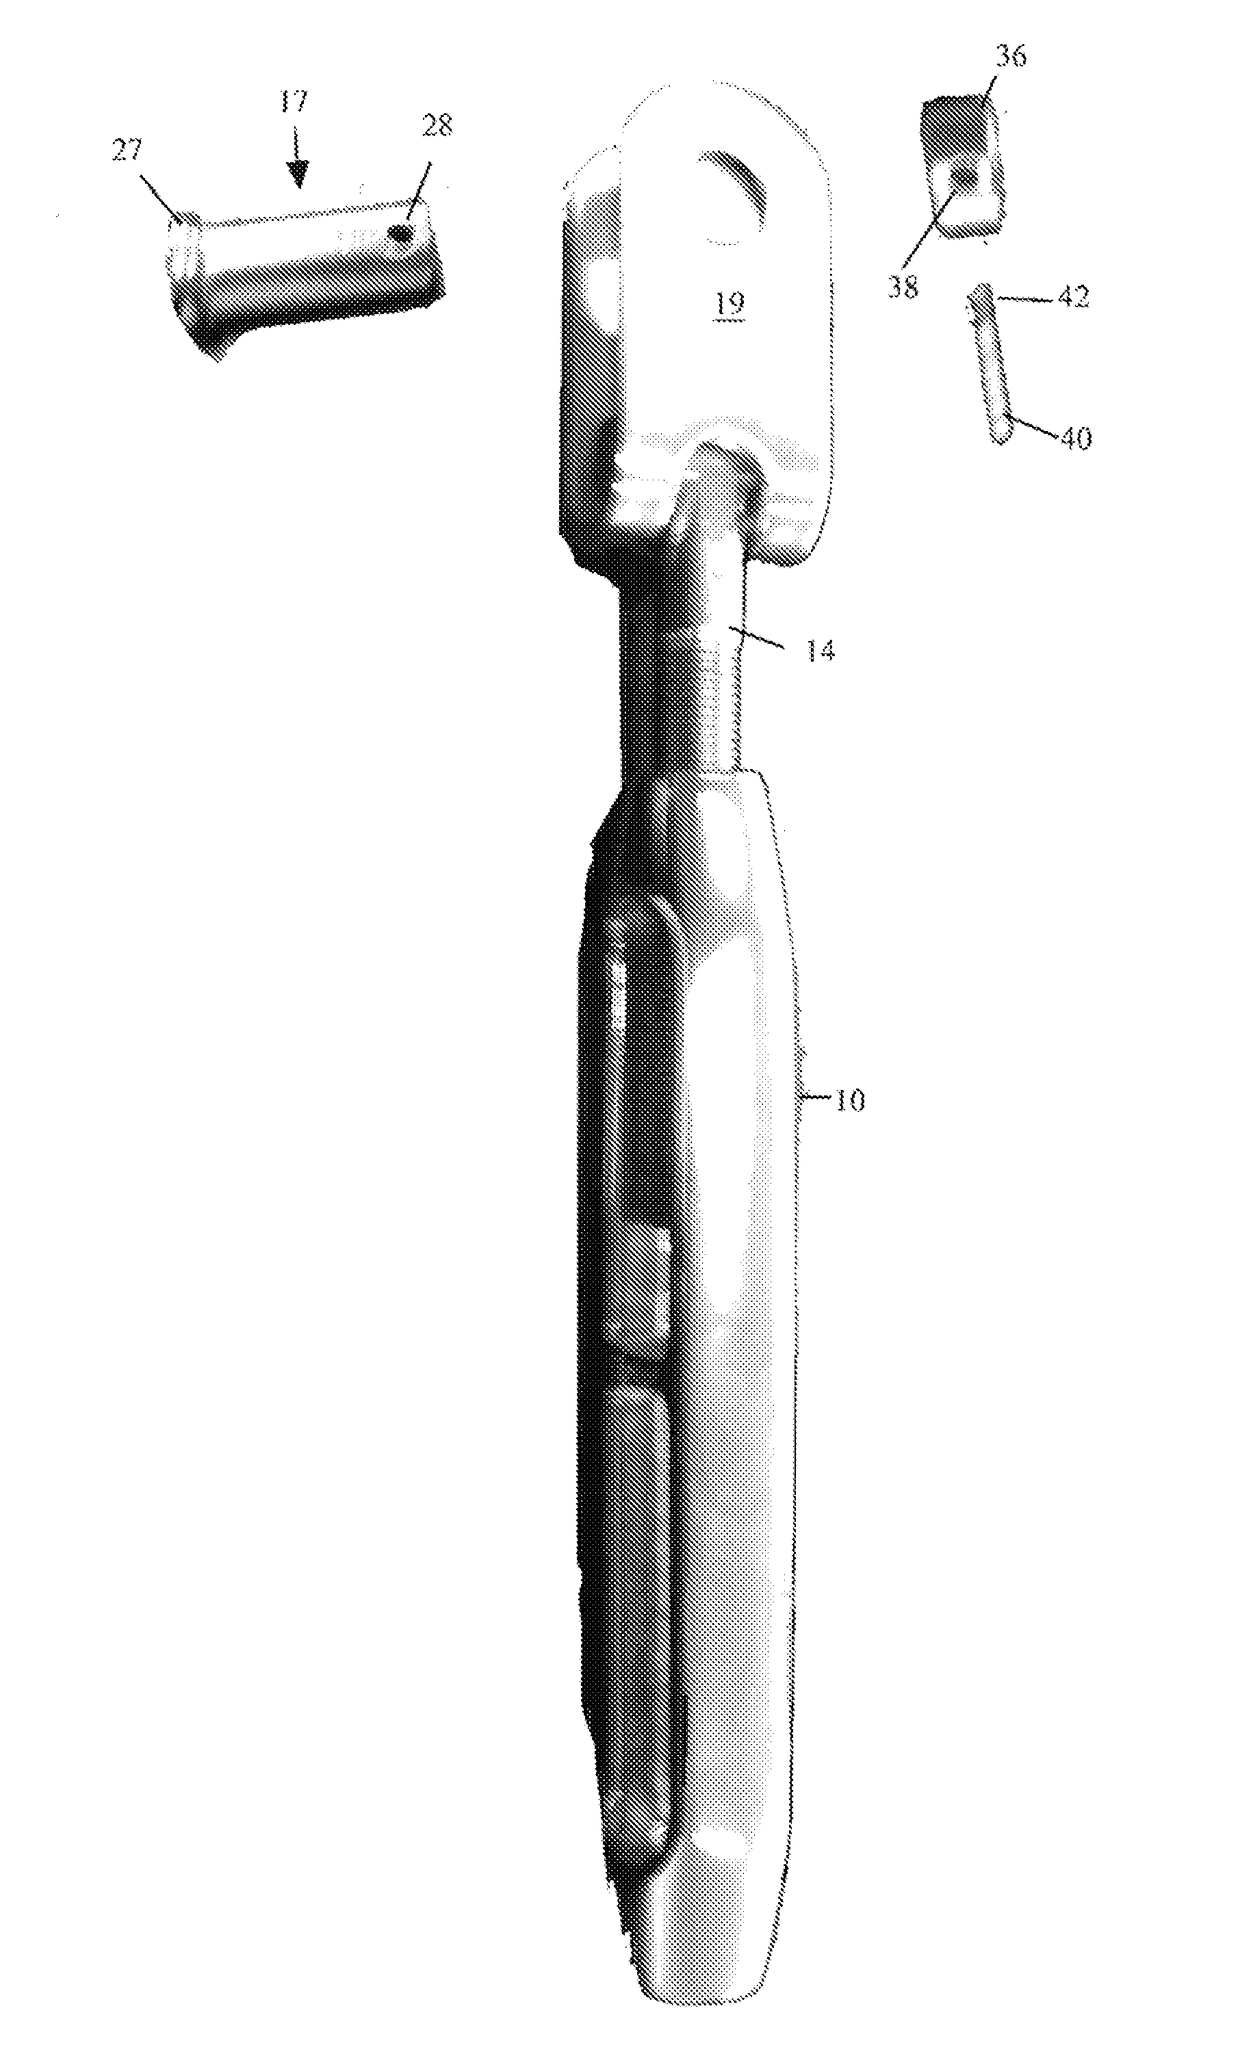 Turnbuckle with improved toggle jaw